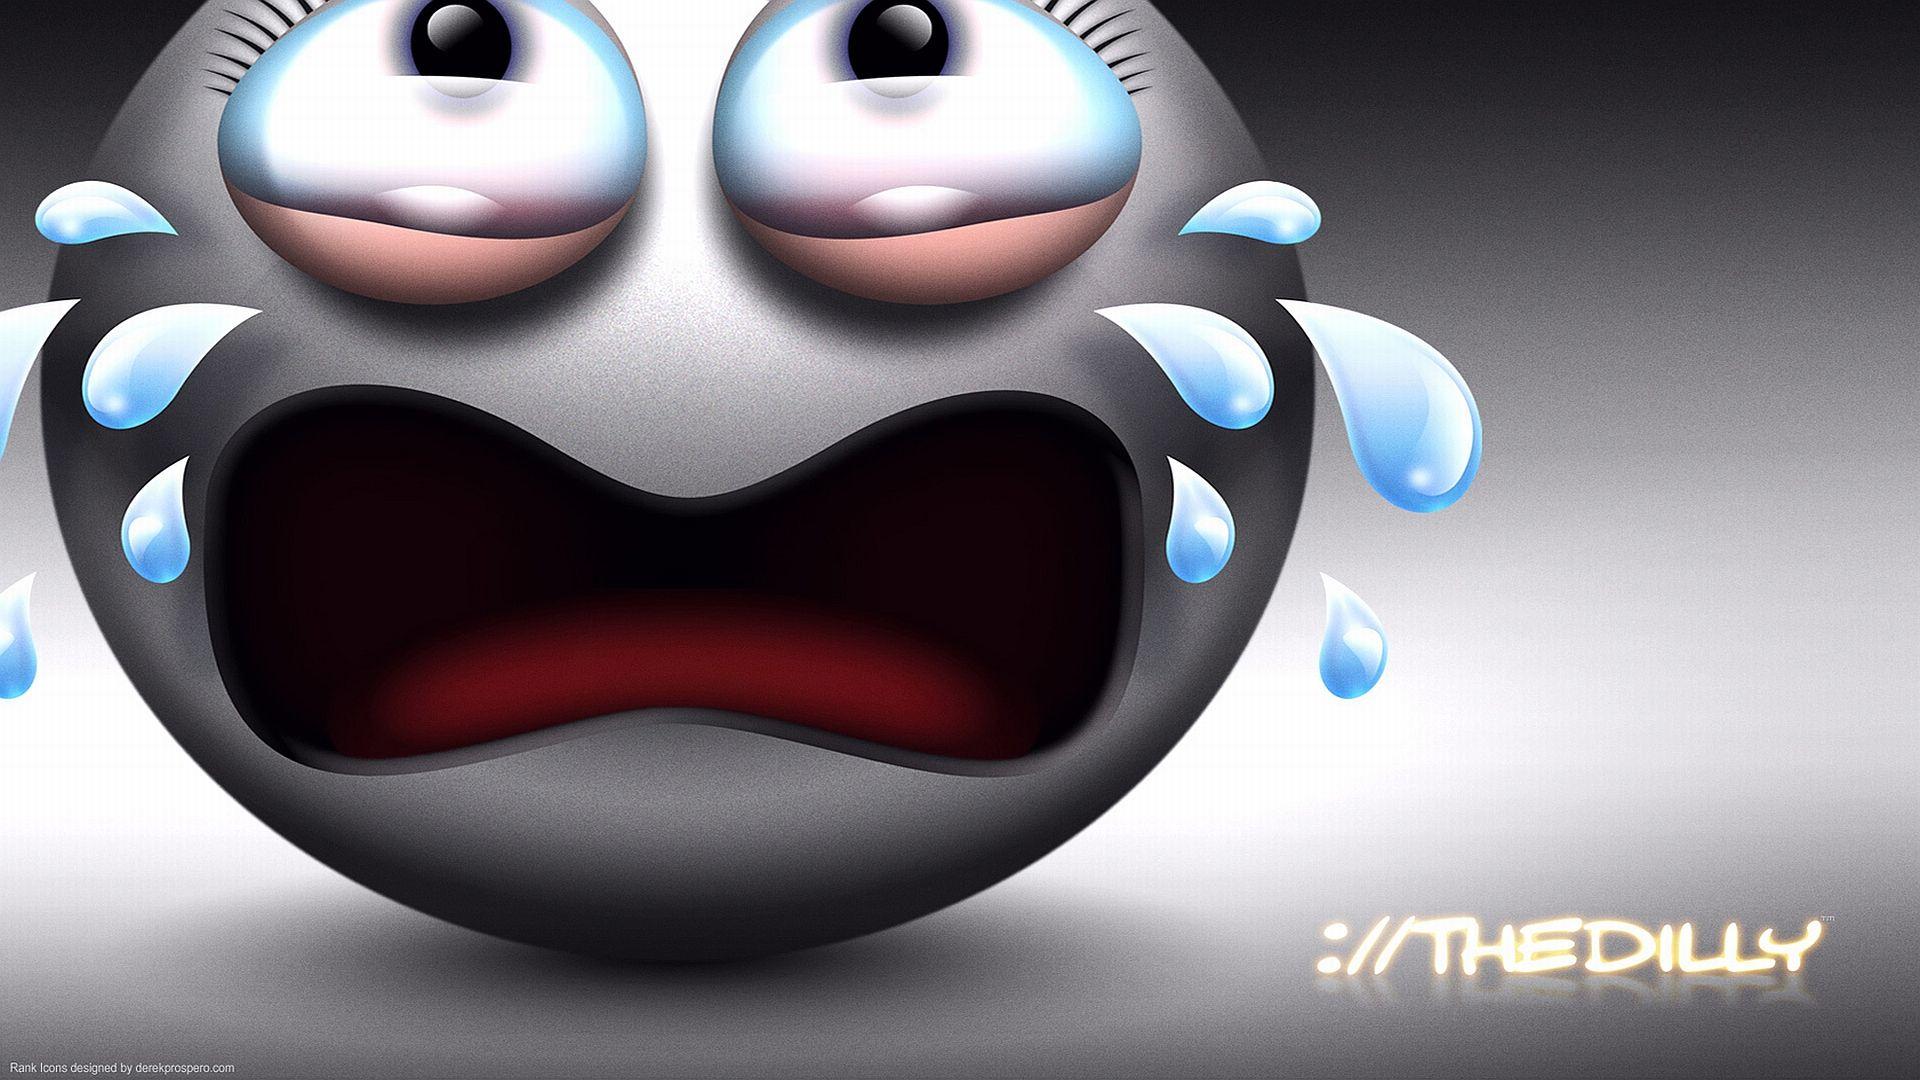 Emotional Smiley Full HD Wallpaper and Background Imagex1080